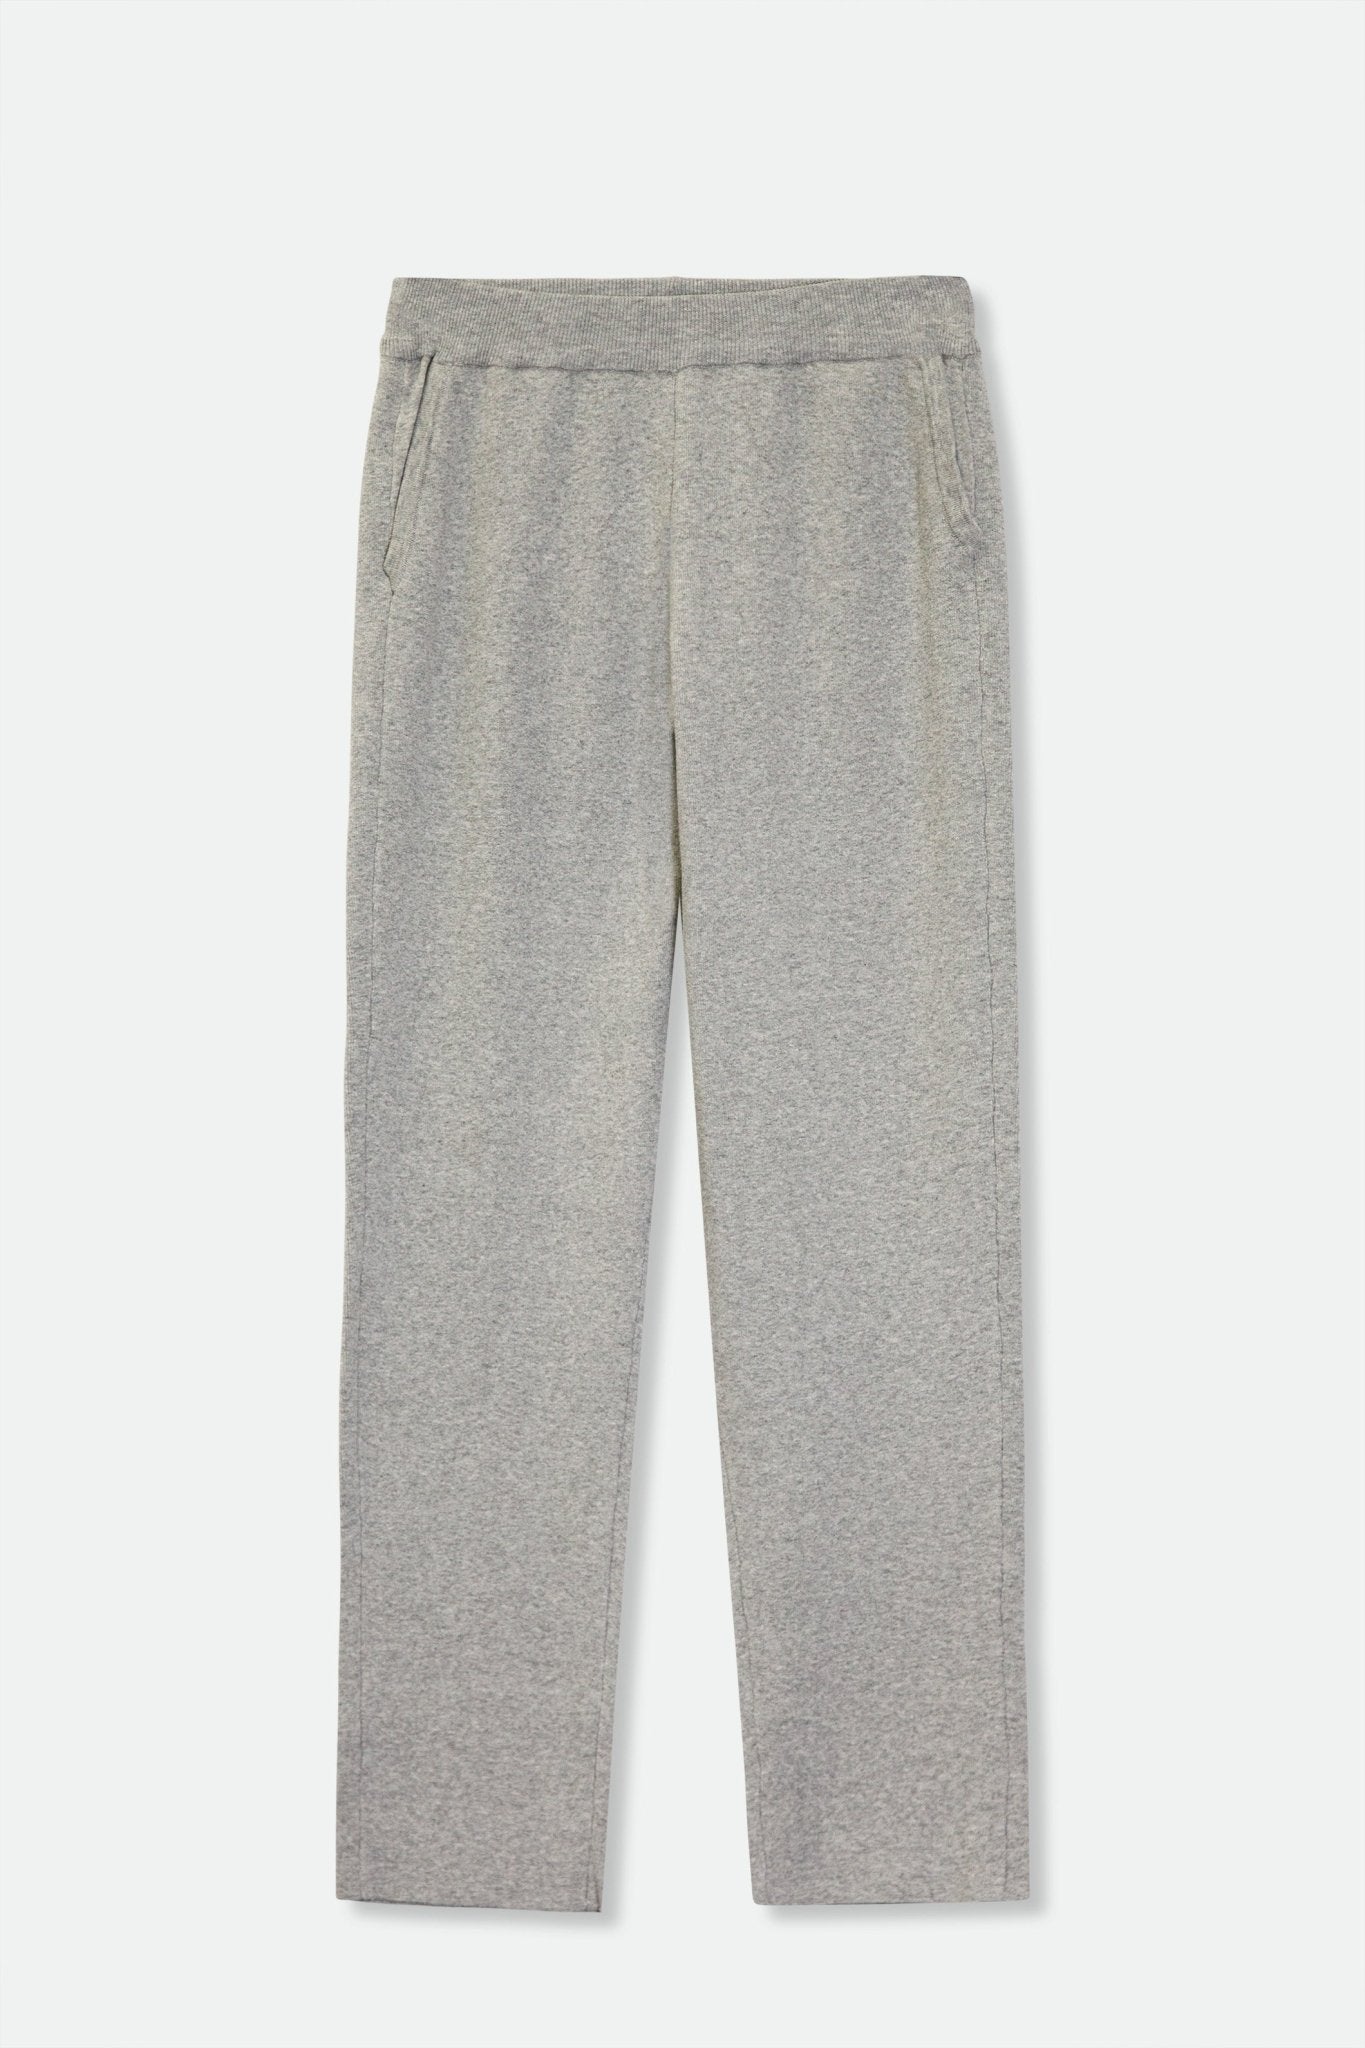 PAIGE PANT IN DOUBLE KNIT HEATHERED PIMA COTTON IN ICE GREY HEATHER - Jarbo